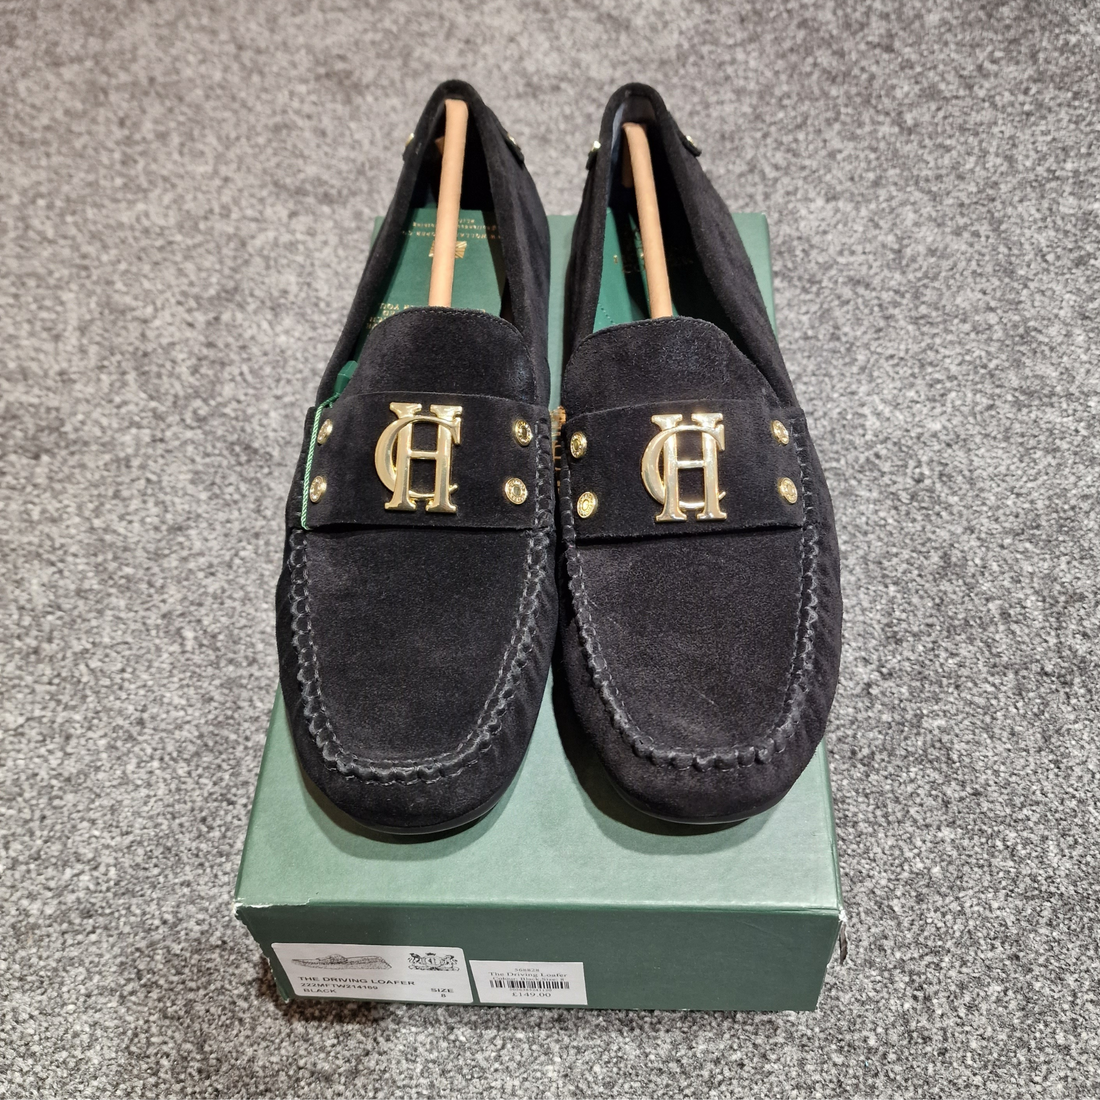 Seconds 004 Driving Loafer Black Suede Size 8